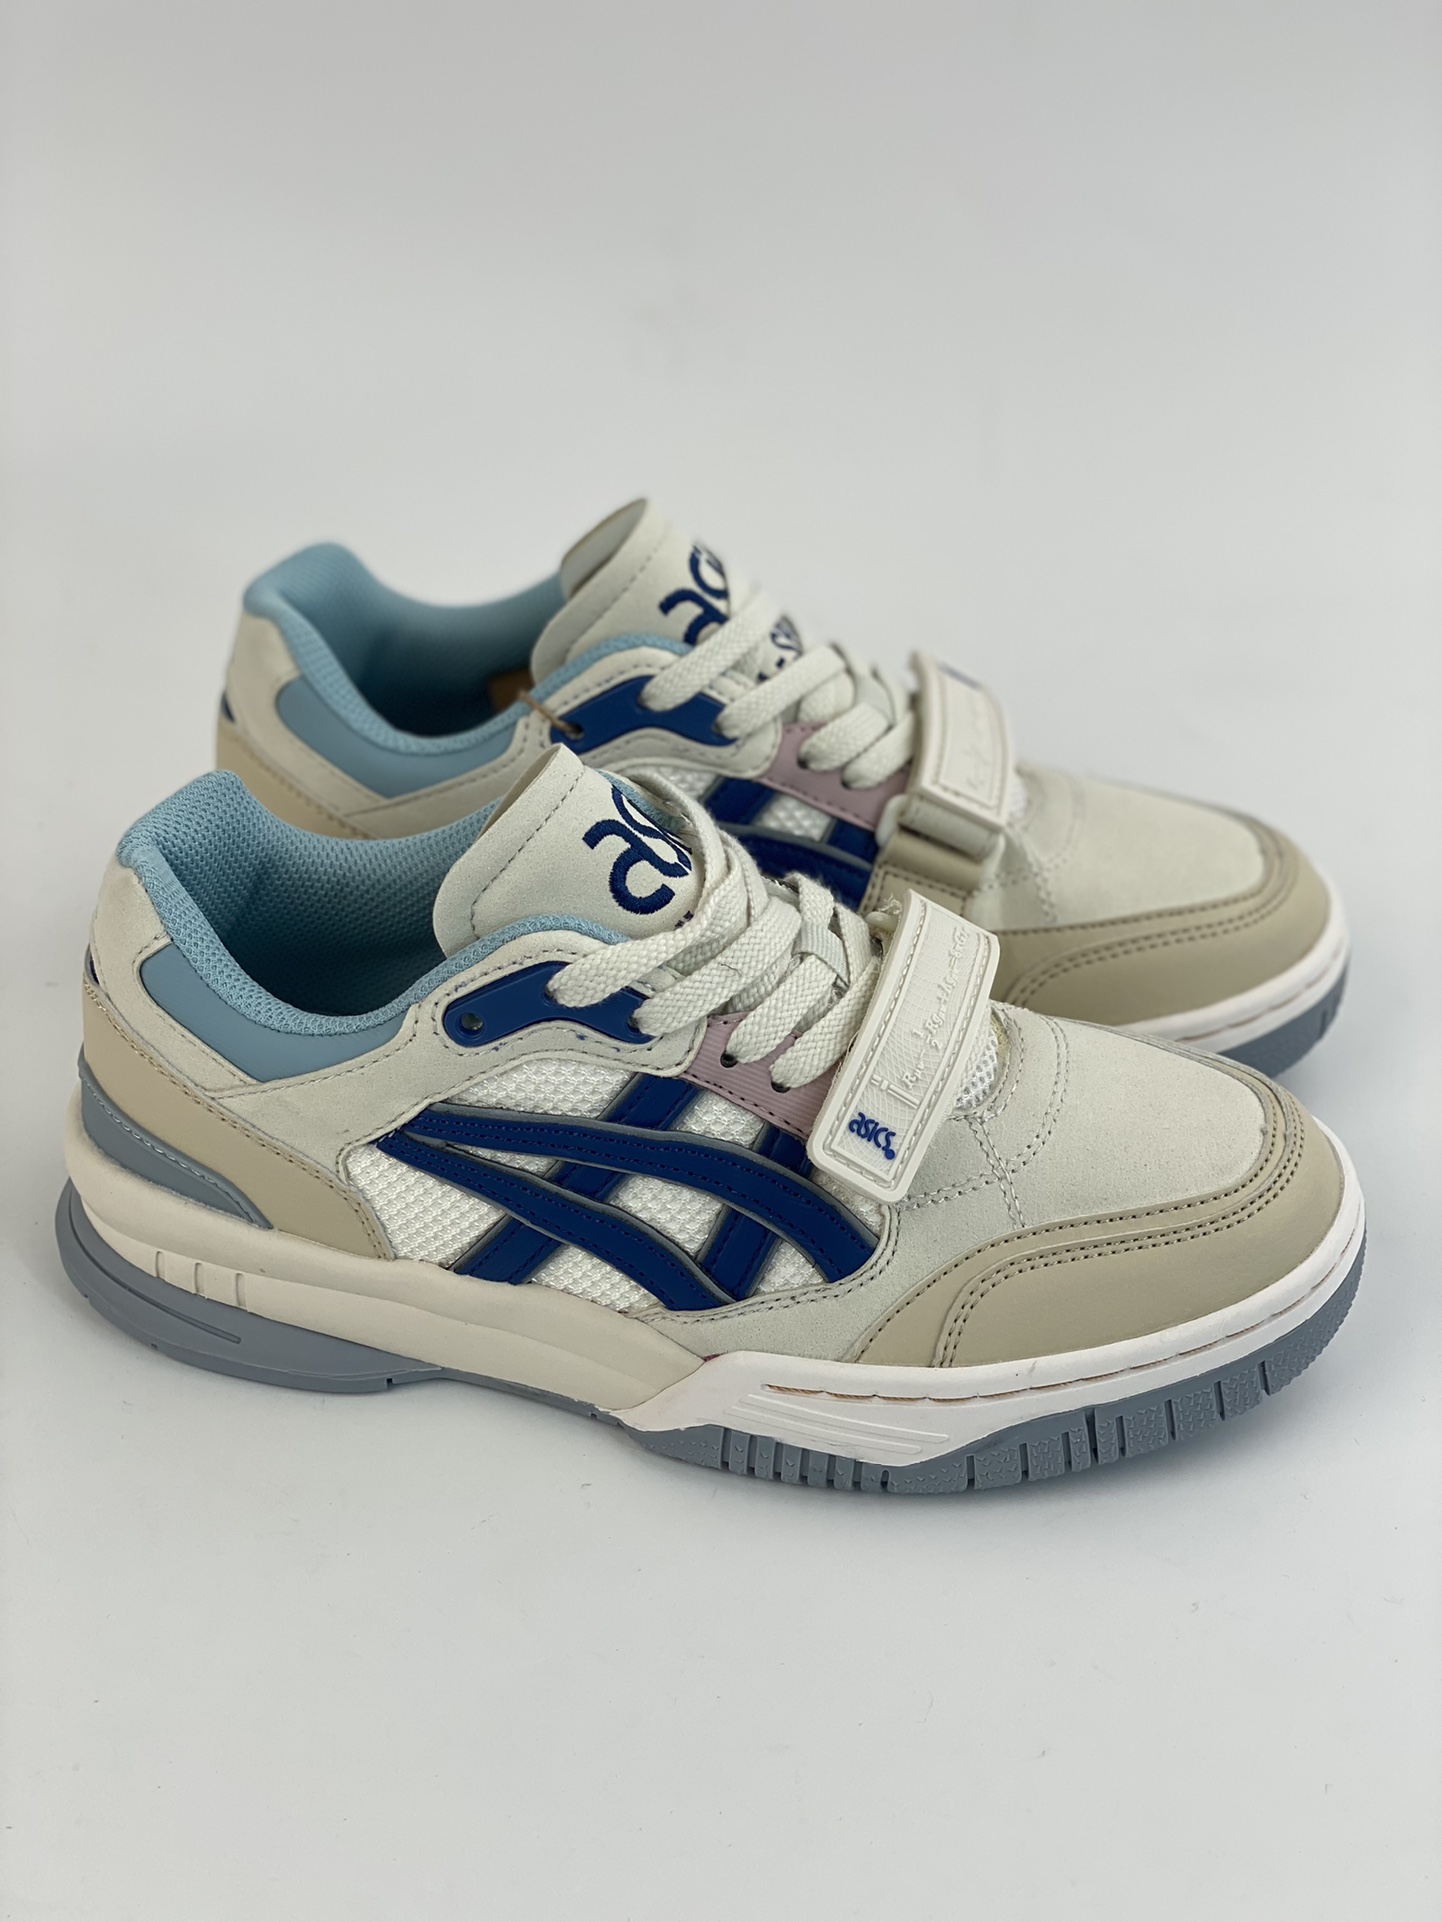 Asics Gel Spotlyte low V2 trend wear-resistant low-top retro basketball shoes 1203A258-105